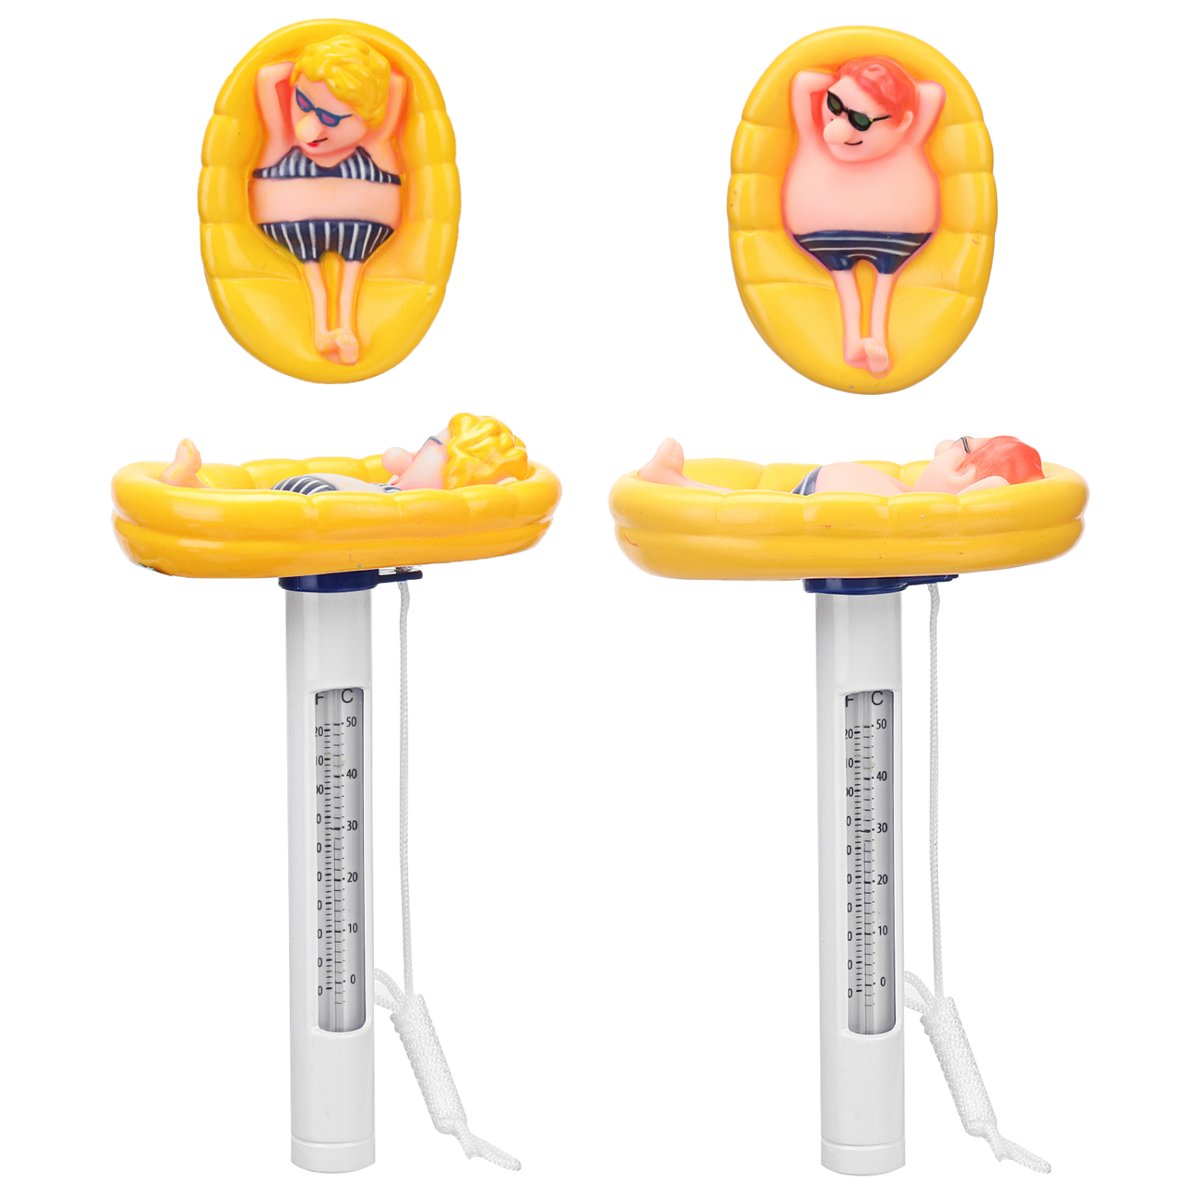 Cartoon-Shatter-Resistant-Floating-Pool-Thermometer-With-String-For-Swimming-Pools-Spas-Hot-Tubs-Wat-1934965-12